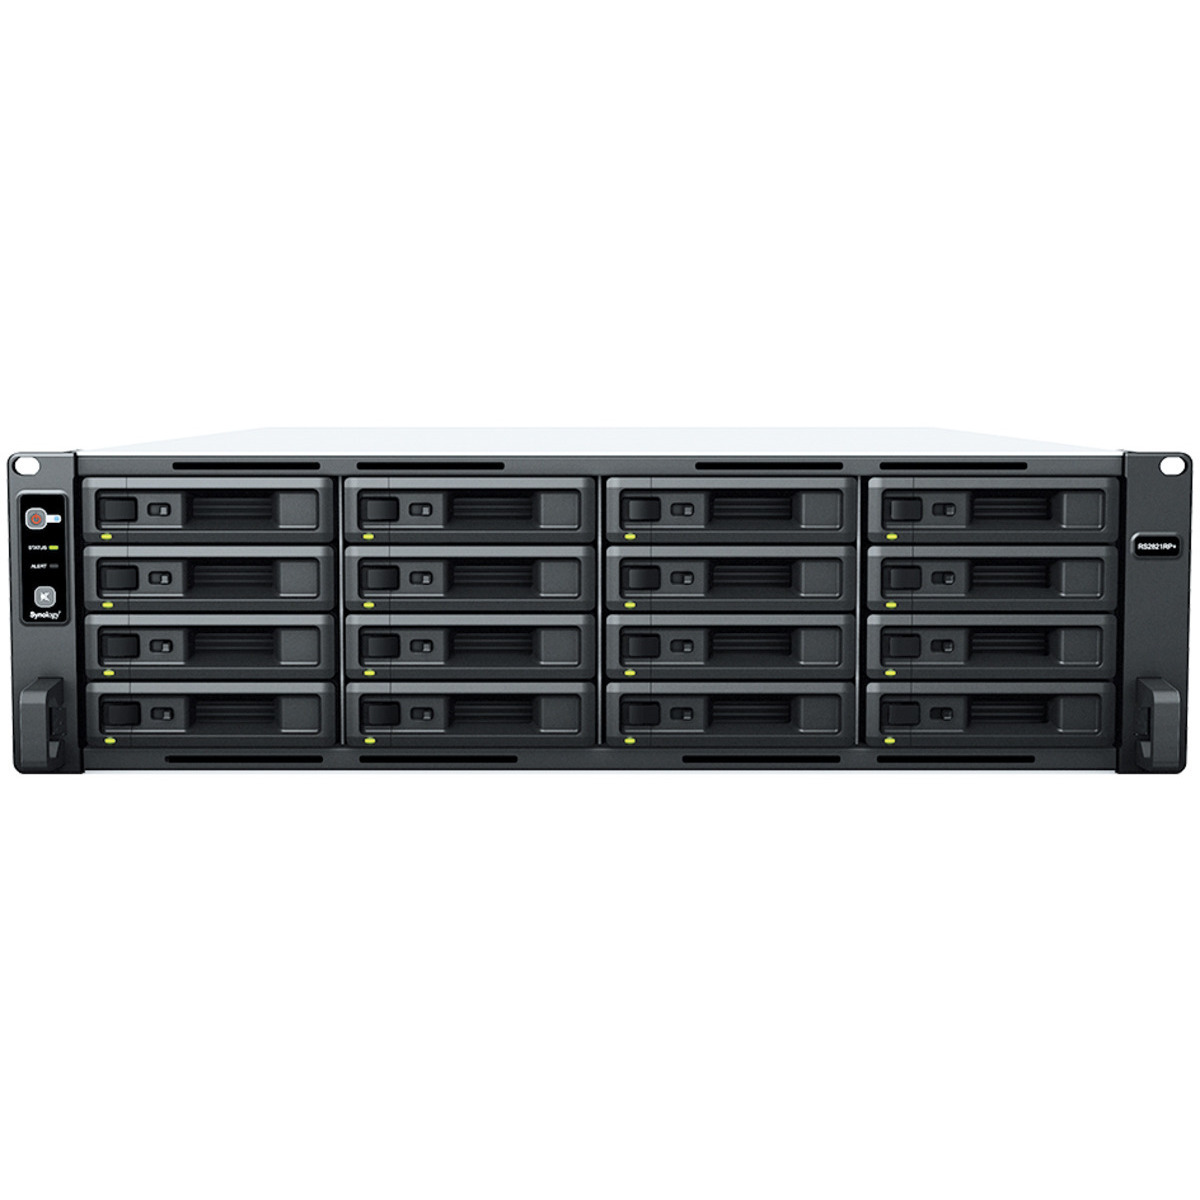 Synology RackStation RS2821RP+ 20tb 16-Bay RackMount Large Business / Enterprise NAS - Network Attached Storage Device 10x2tb Seagate IronWolf Pro ST2000NT001 3.5 7200rpm SATA 6Gb/s HDD NAS Class Drives Installed - Burn-In Tested RackStation RS2821RP+